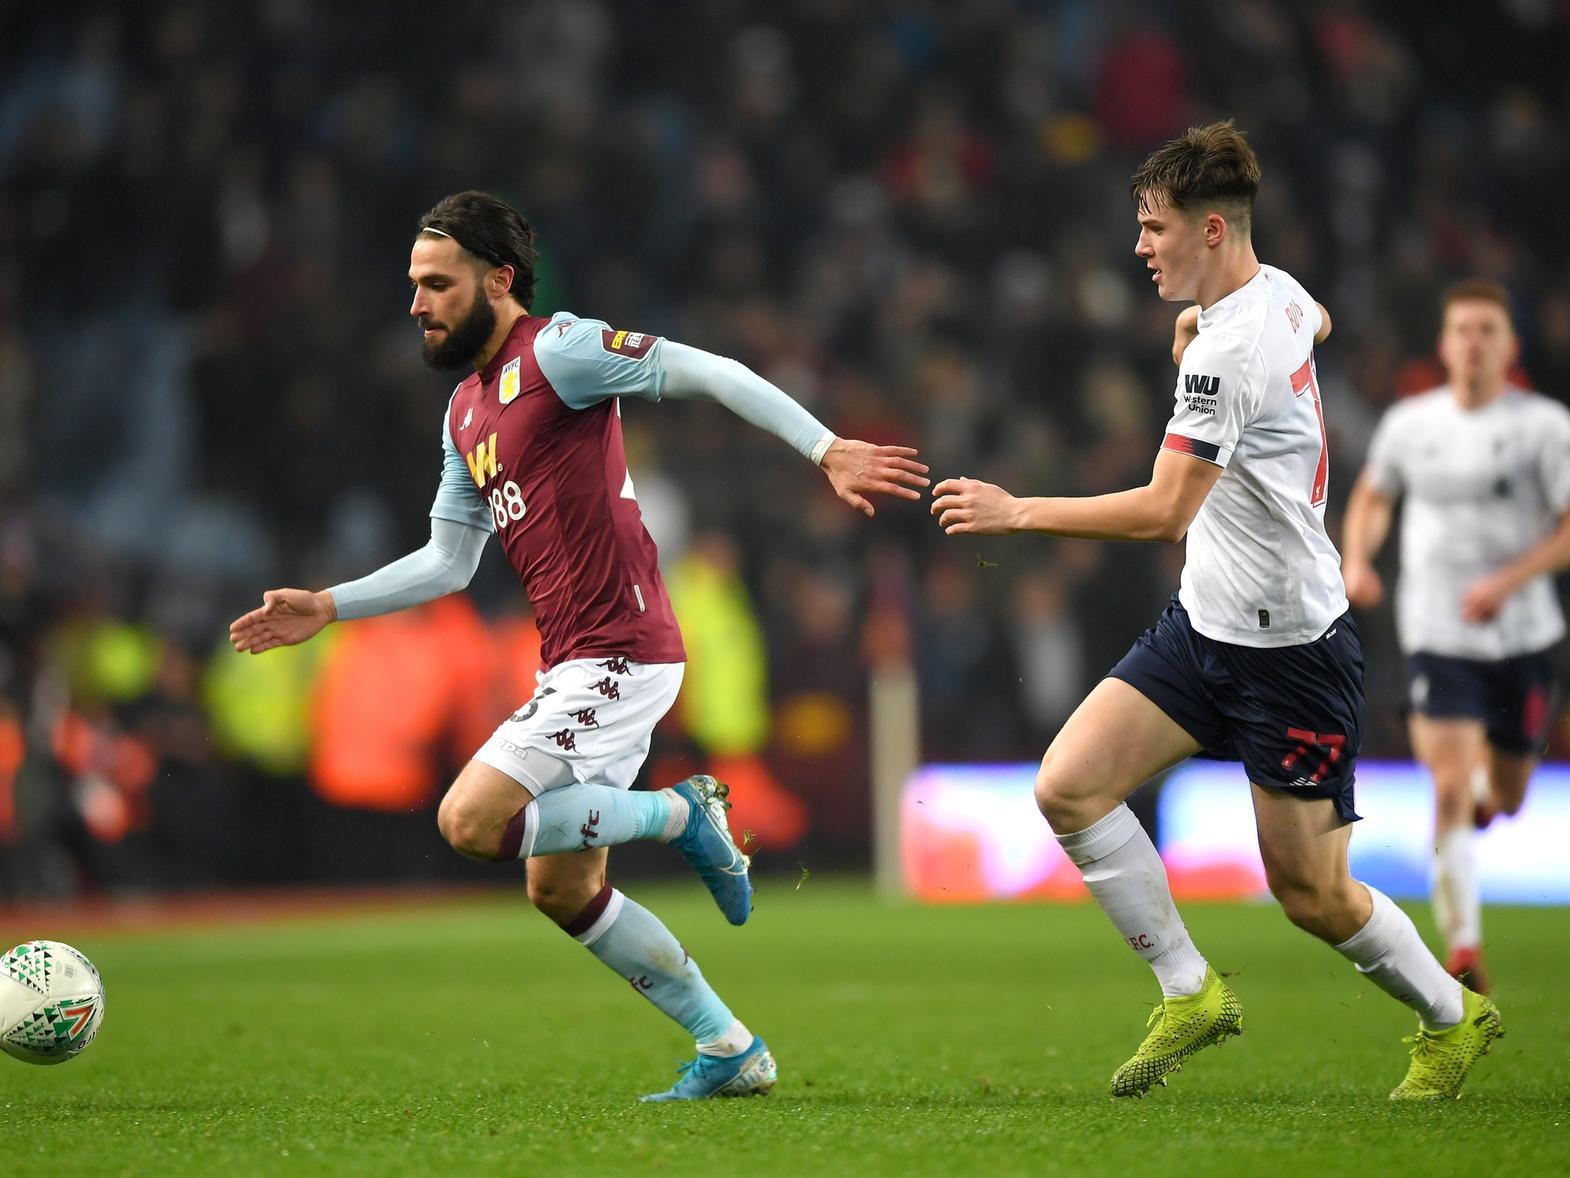 Aston Villa look set to send outcast Jota out on loan to Fulham for the remainder of the season, as they look to slash their wage bill in order to bring in another new striker. (Daily Mail)